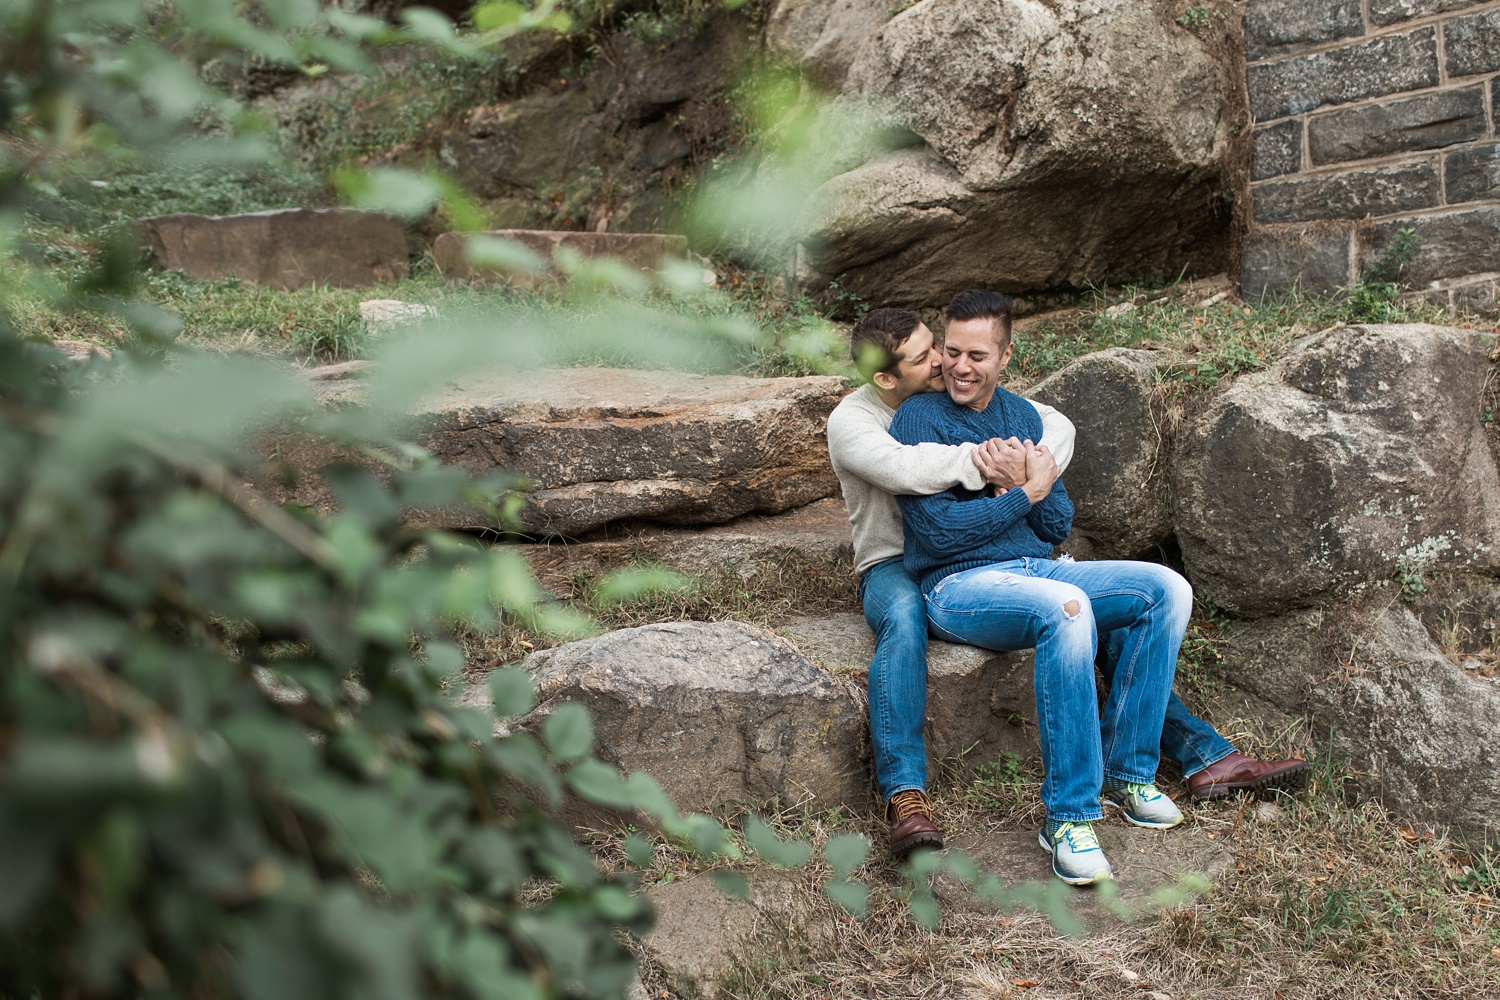 Philadelphia Museum of Art Engagement Session | Fall Engagement Photography | Paul and Ken